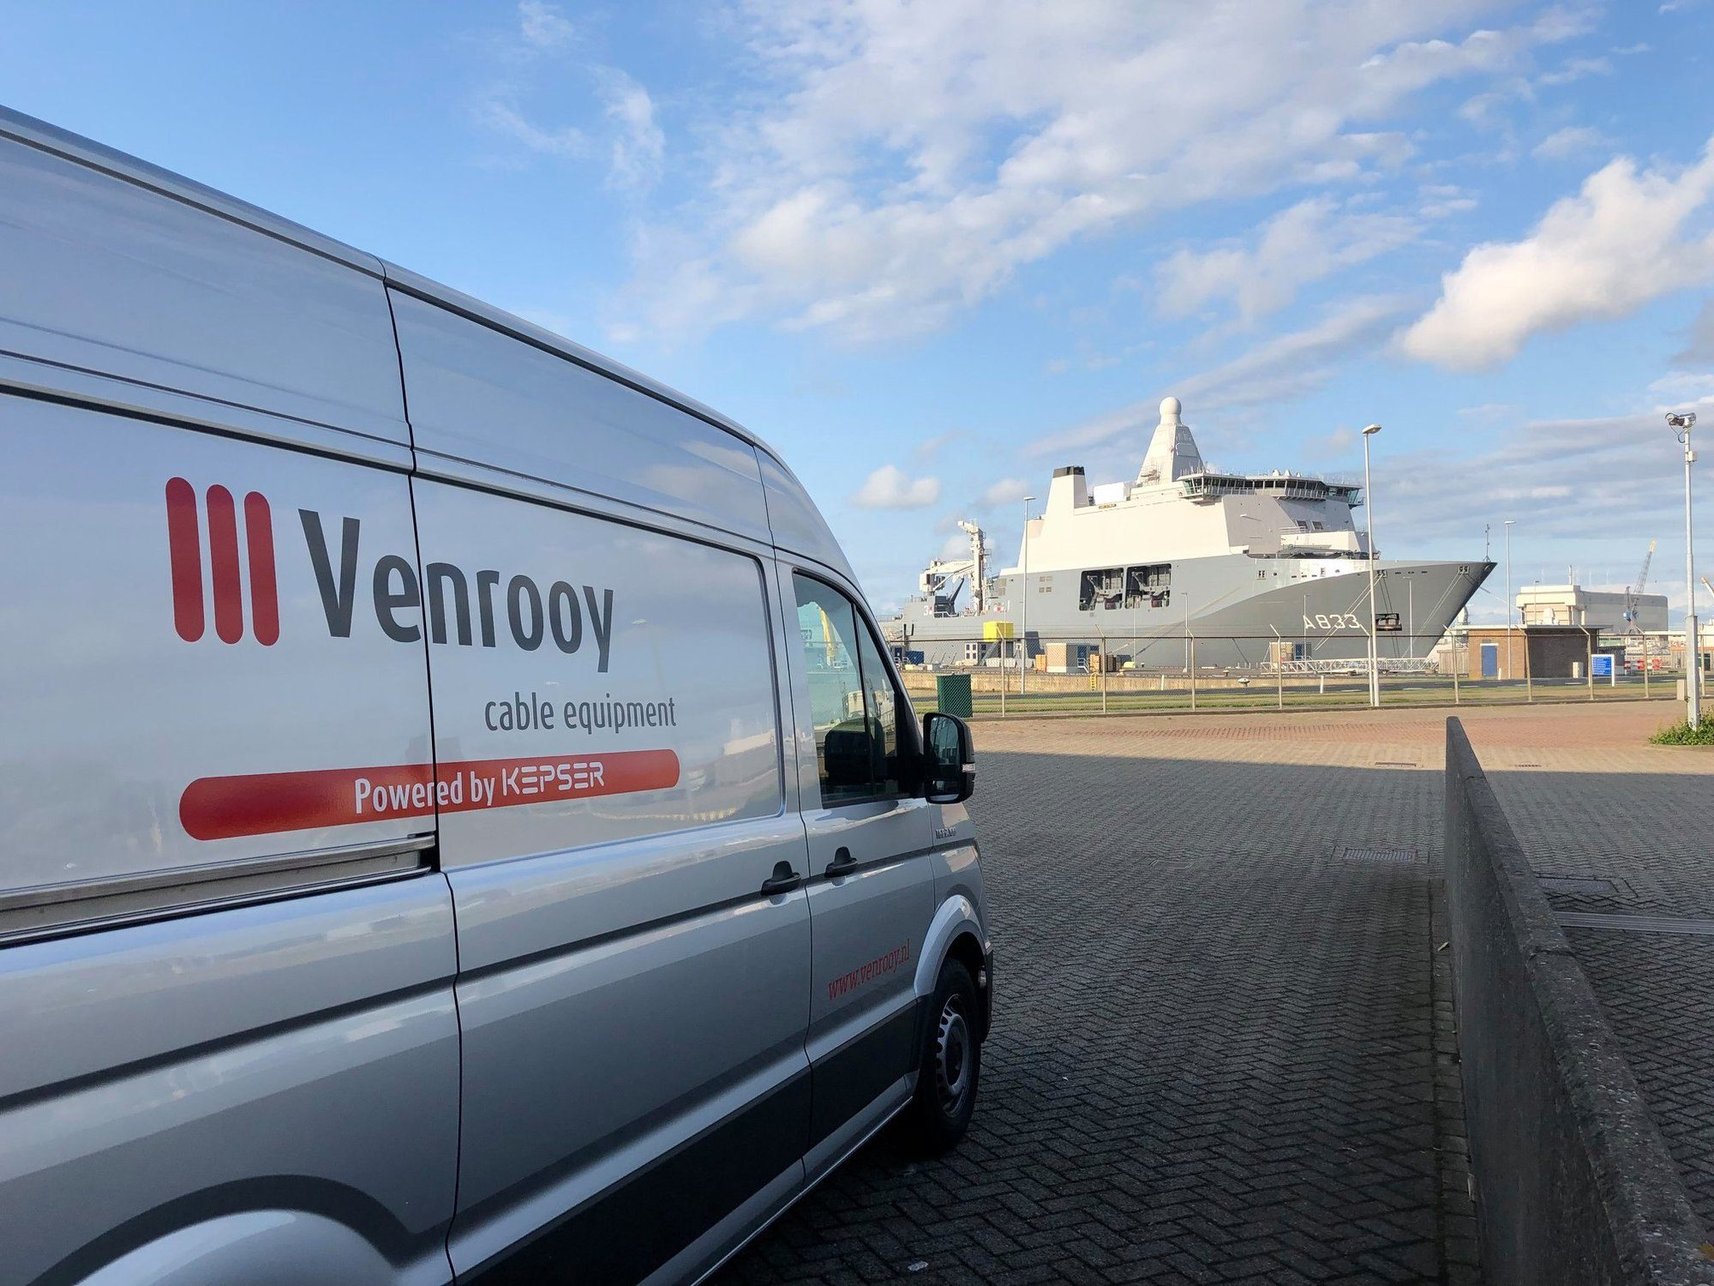 Venrooy Cable equipment